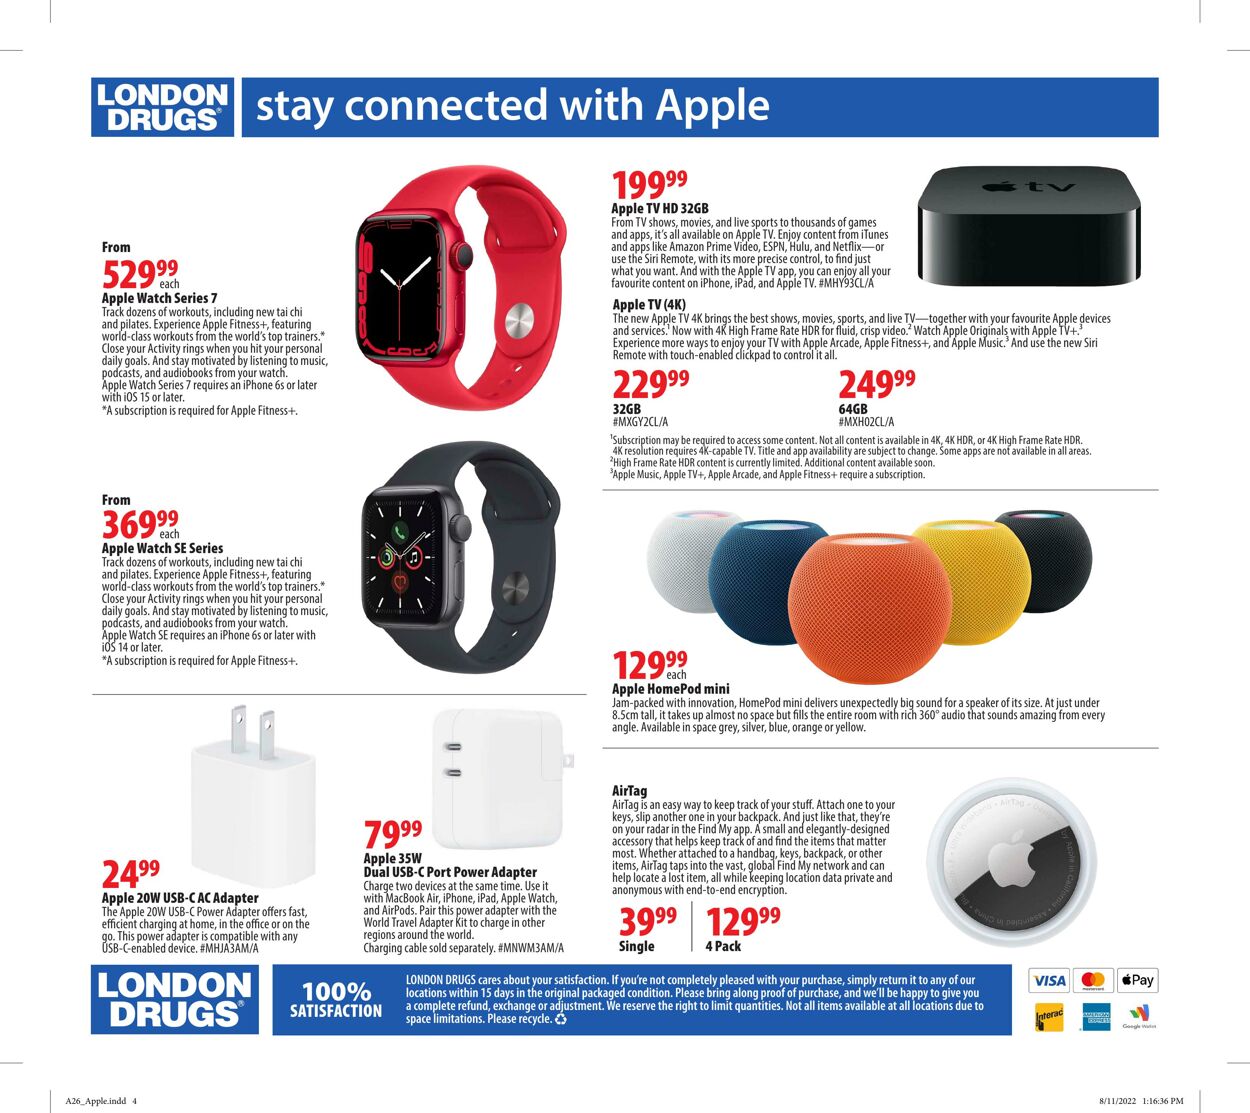 Circulaire London Drugs 26.08.2022 - 31.08.2022